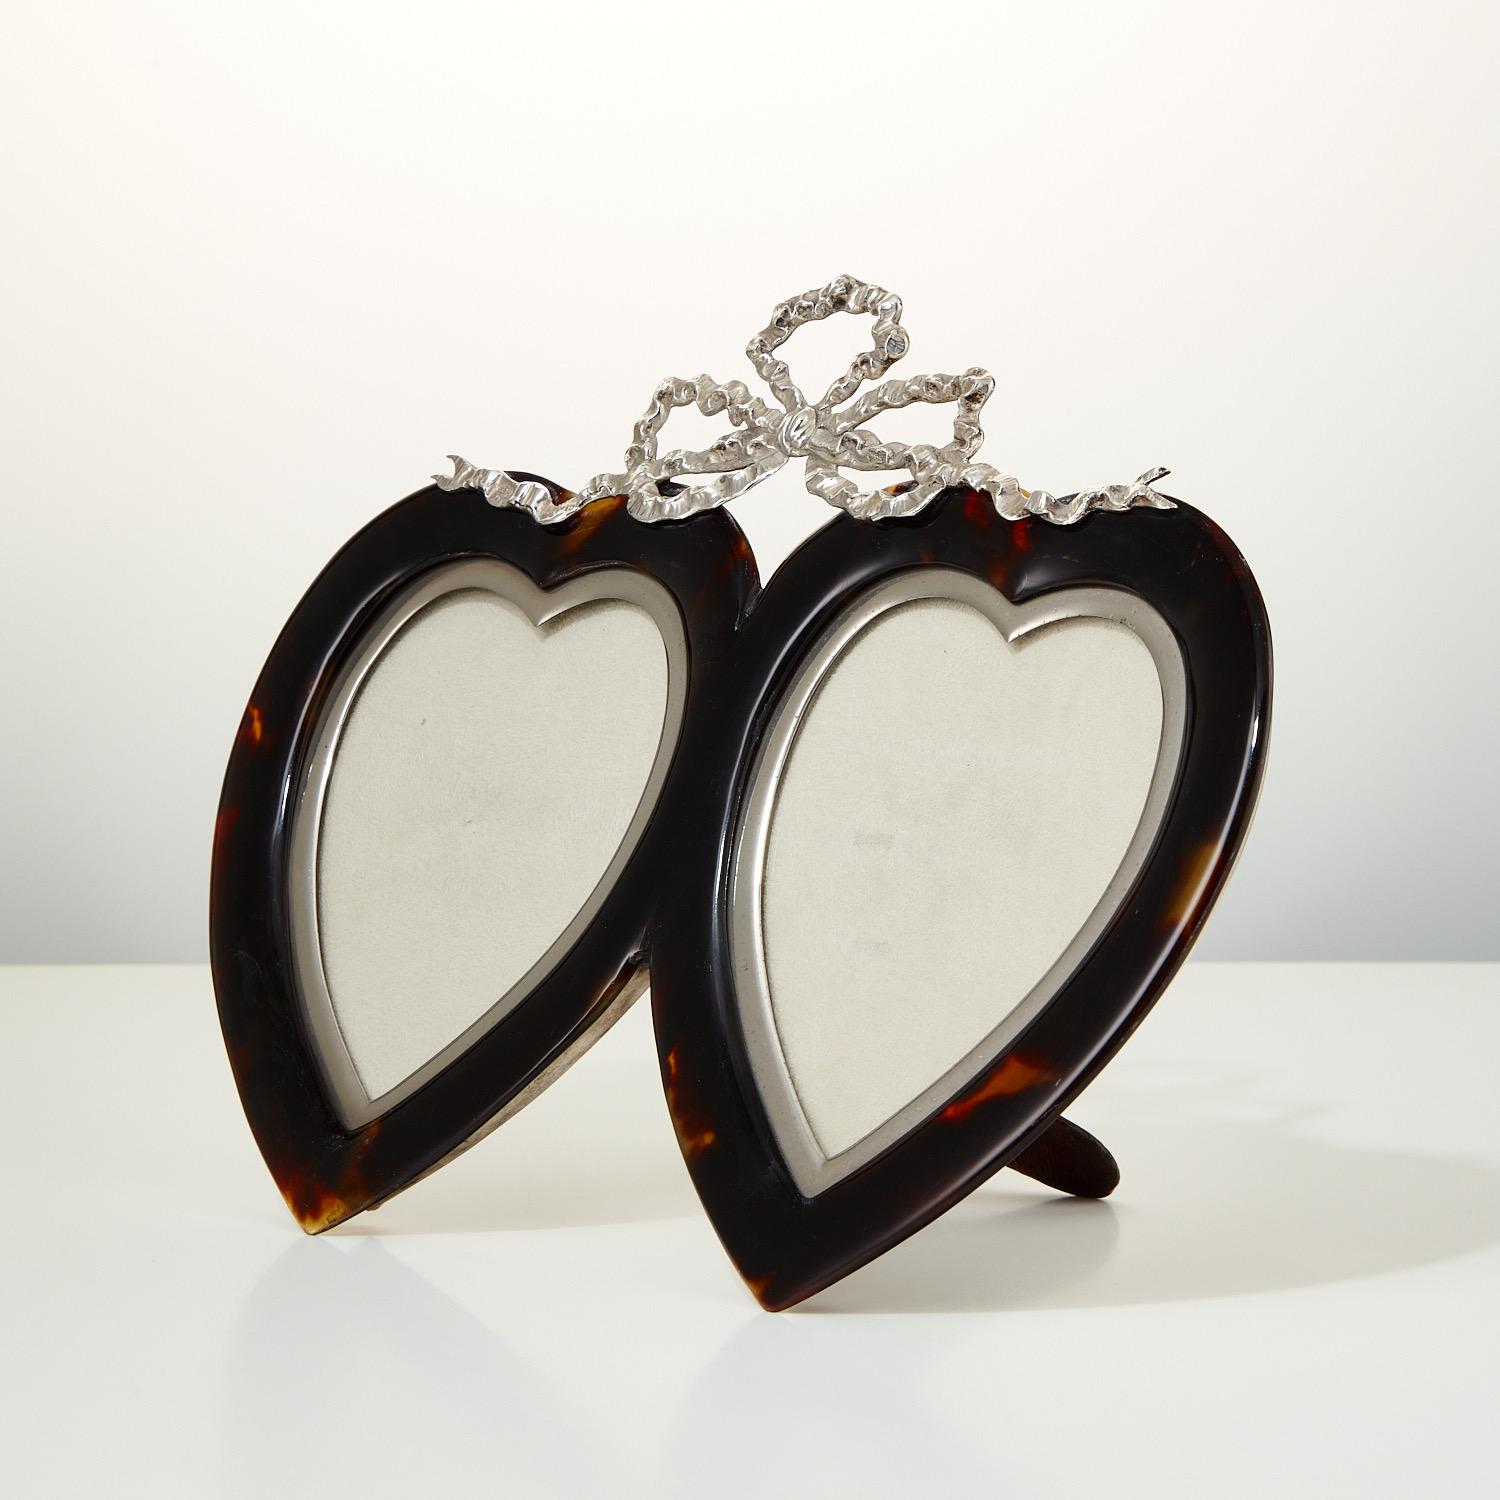 English Antique Tortoiseshell Sterling Silver Heart Photograph Frame Dated London 1897 For Sale